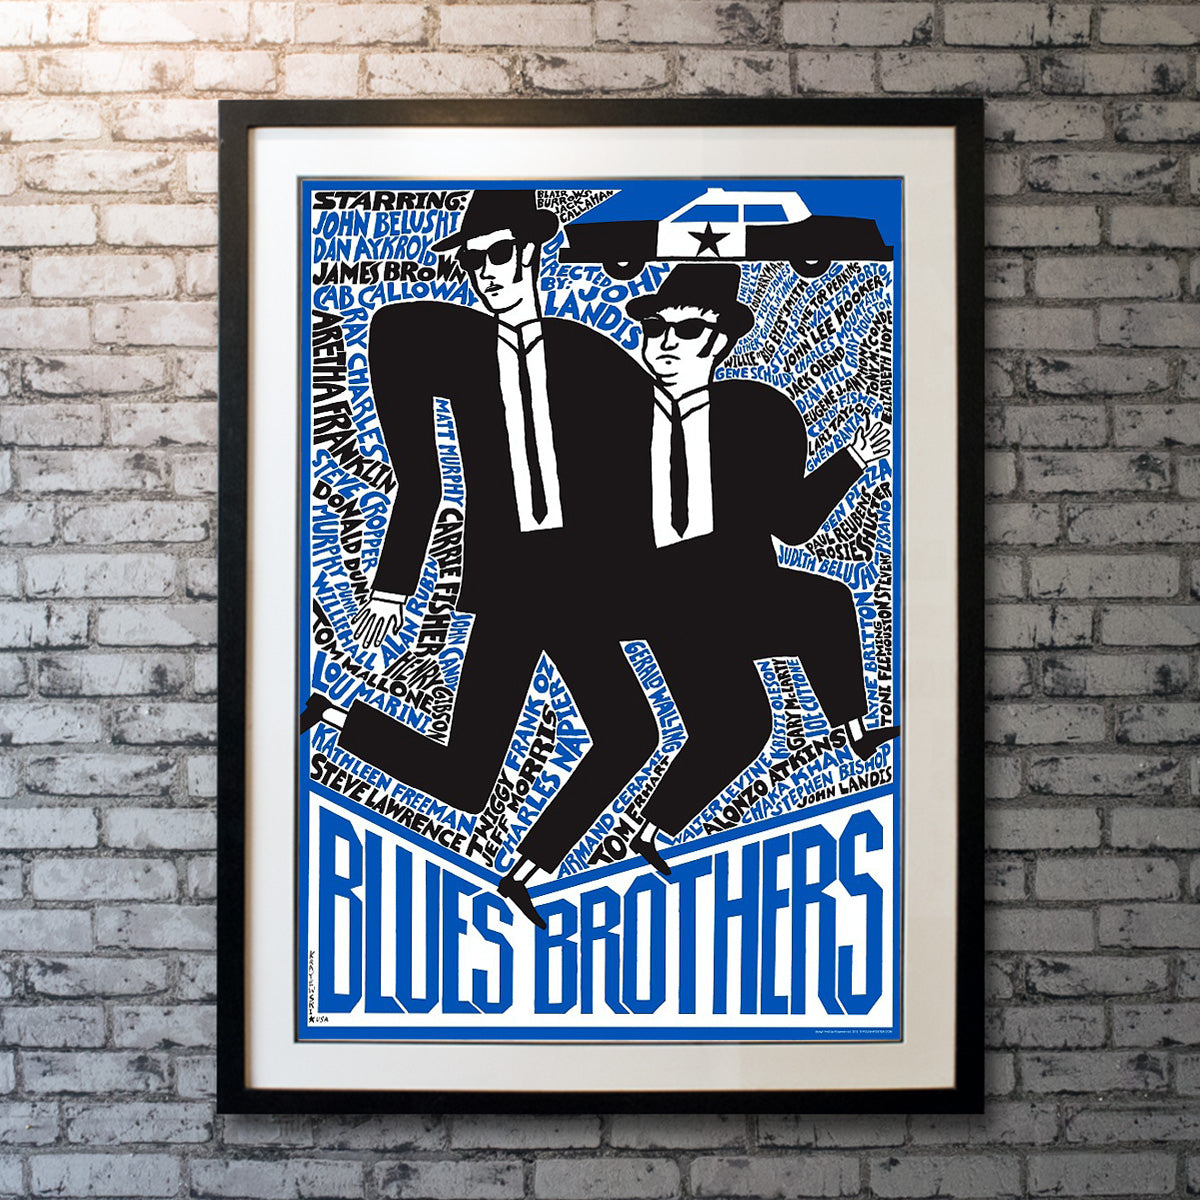 Blues Brothers, The (2012R)